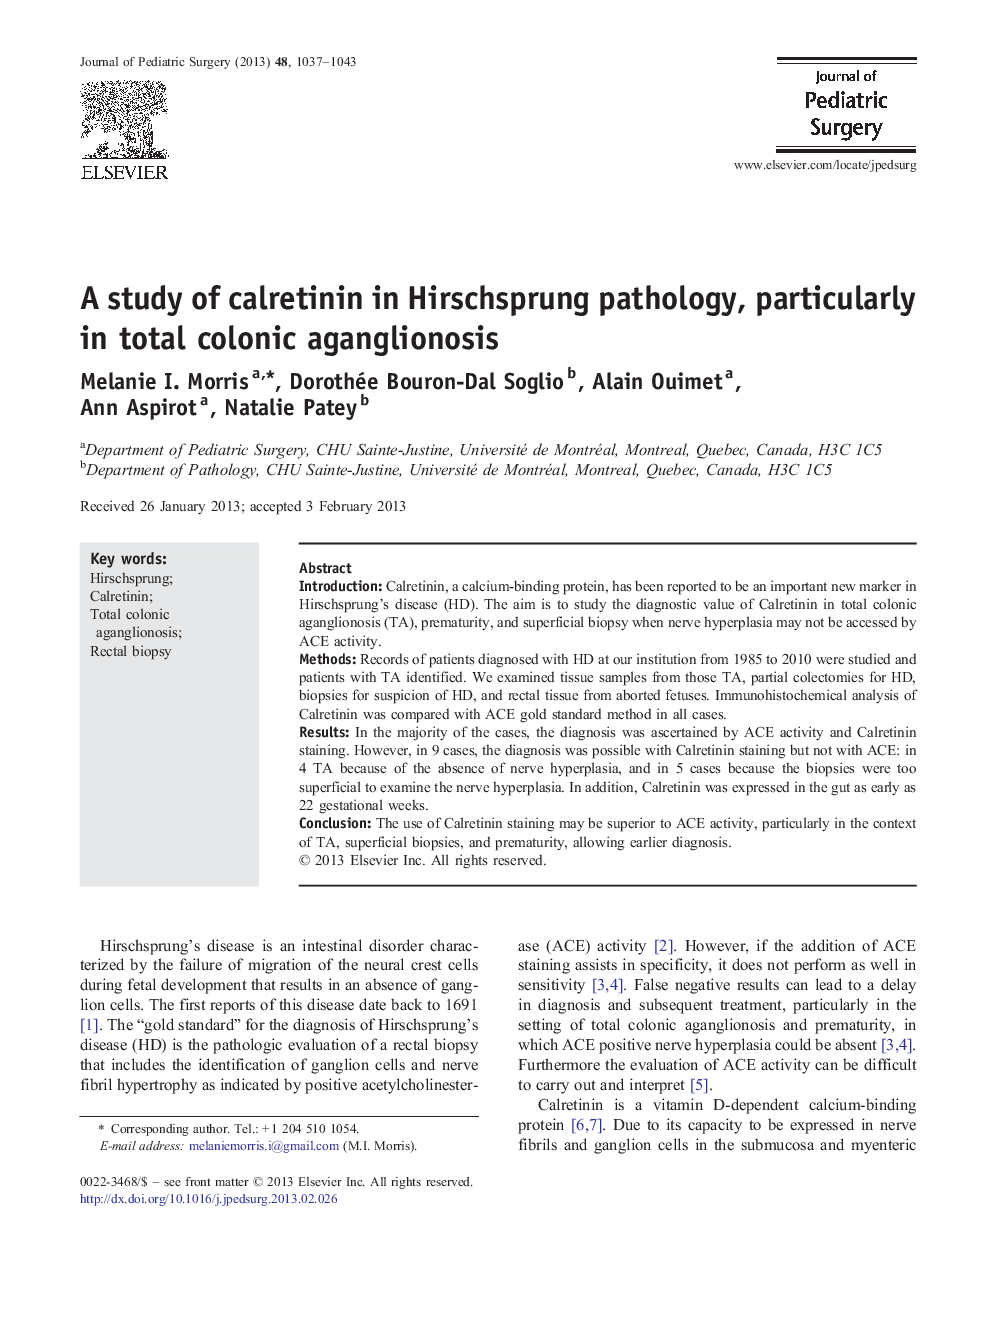 A study of calretinin in Hirschsprung pathology, particularly in total colonic aganglionosis